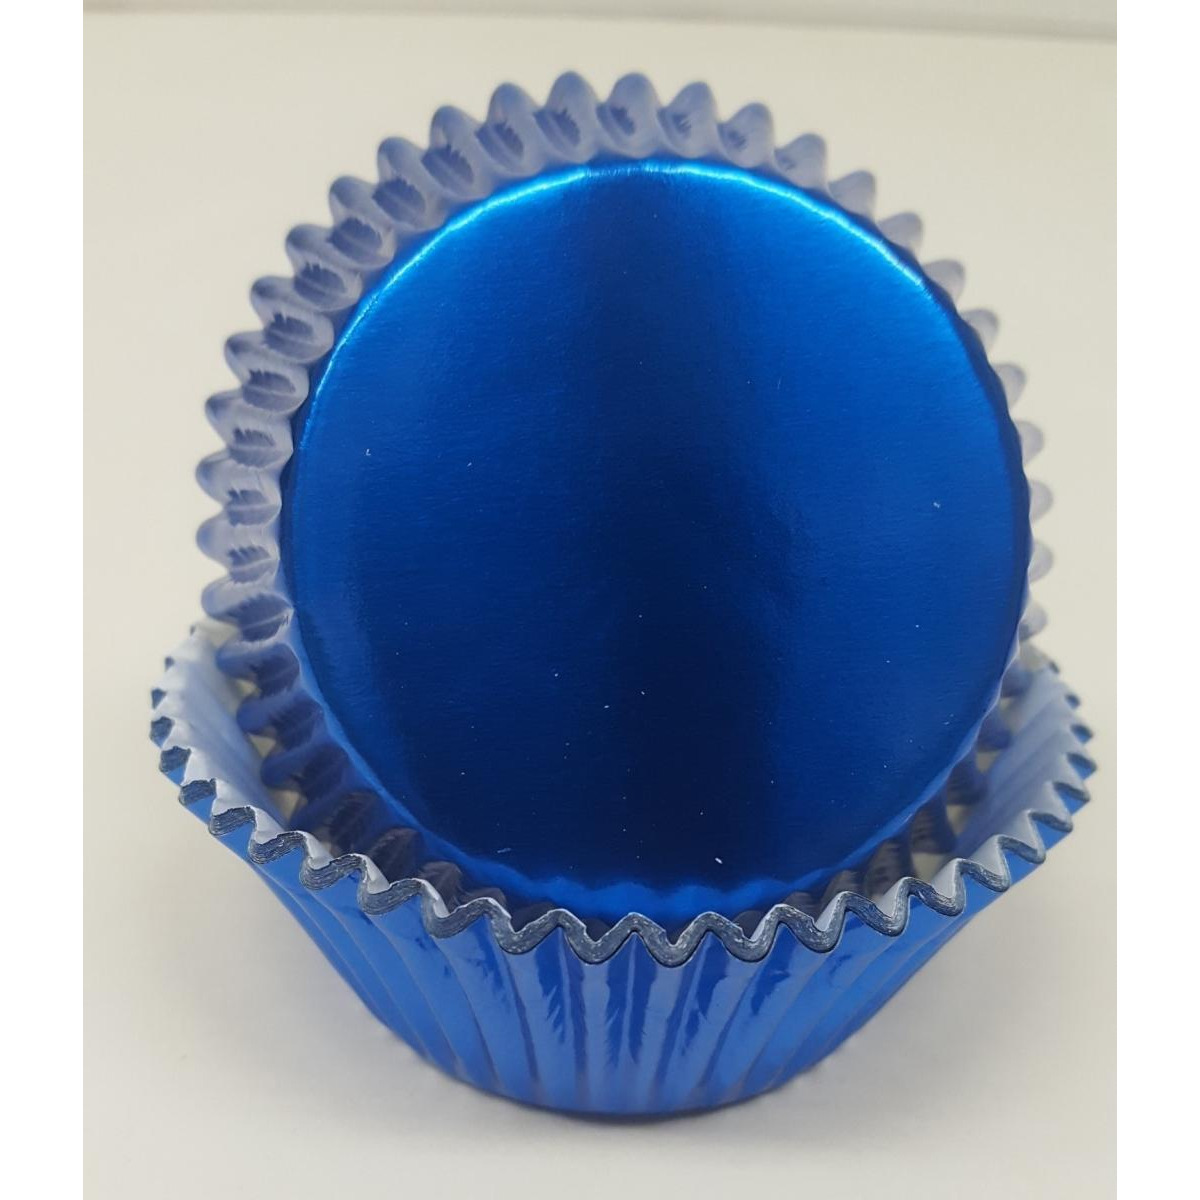 Viking -15CX BLUE FOIL BAKING CUP 2 x 1.13 in. Wall Foil Baking Cup with Greaseproof Liner - Blue - 1000 Piece